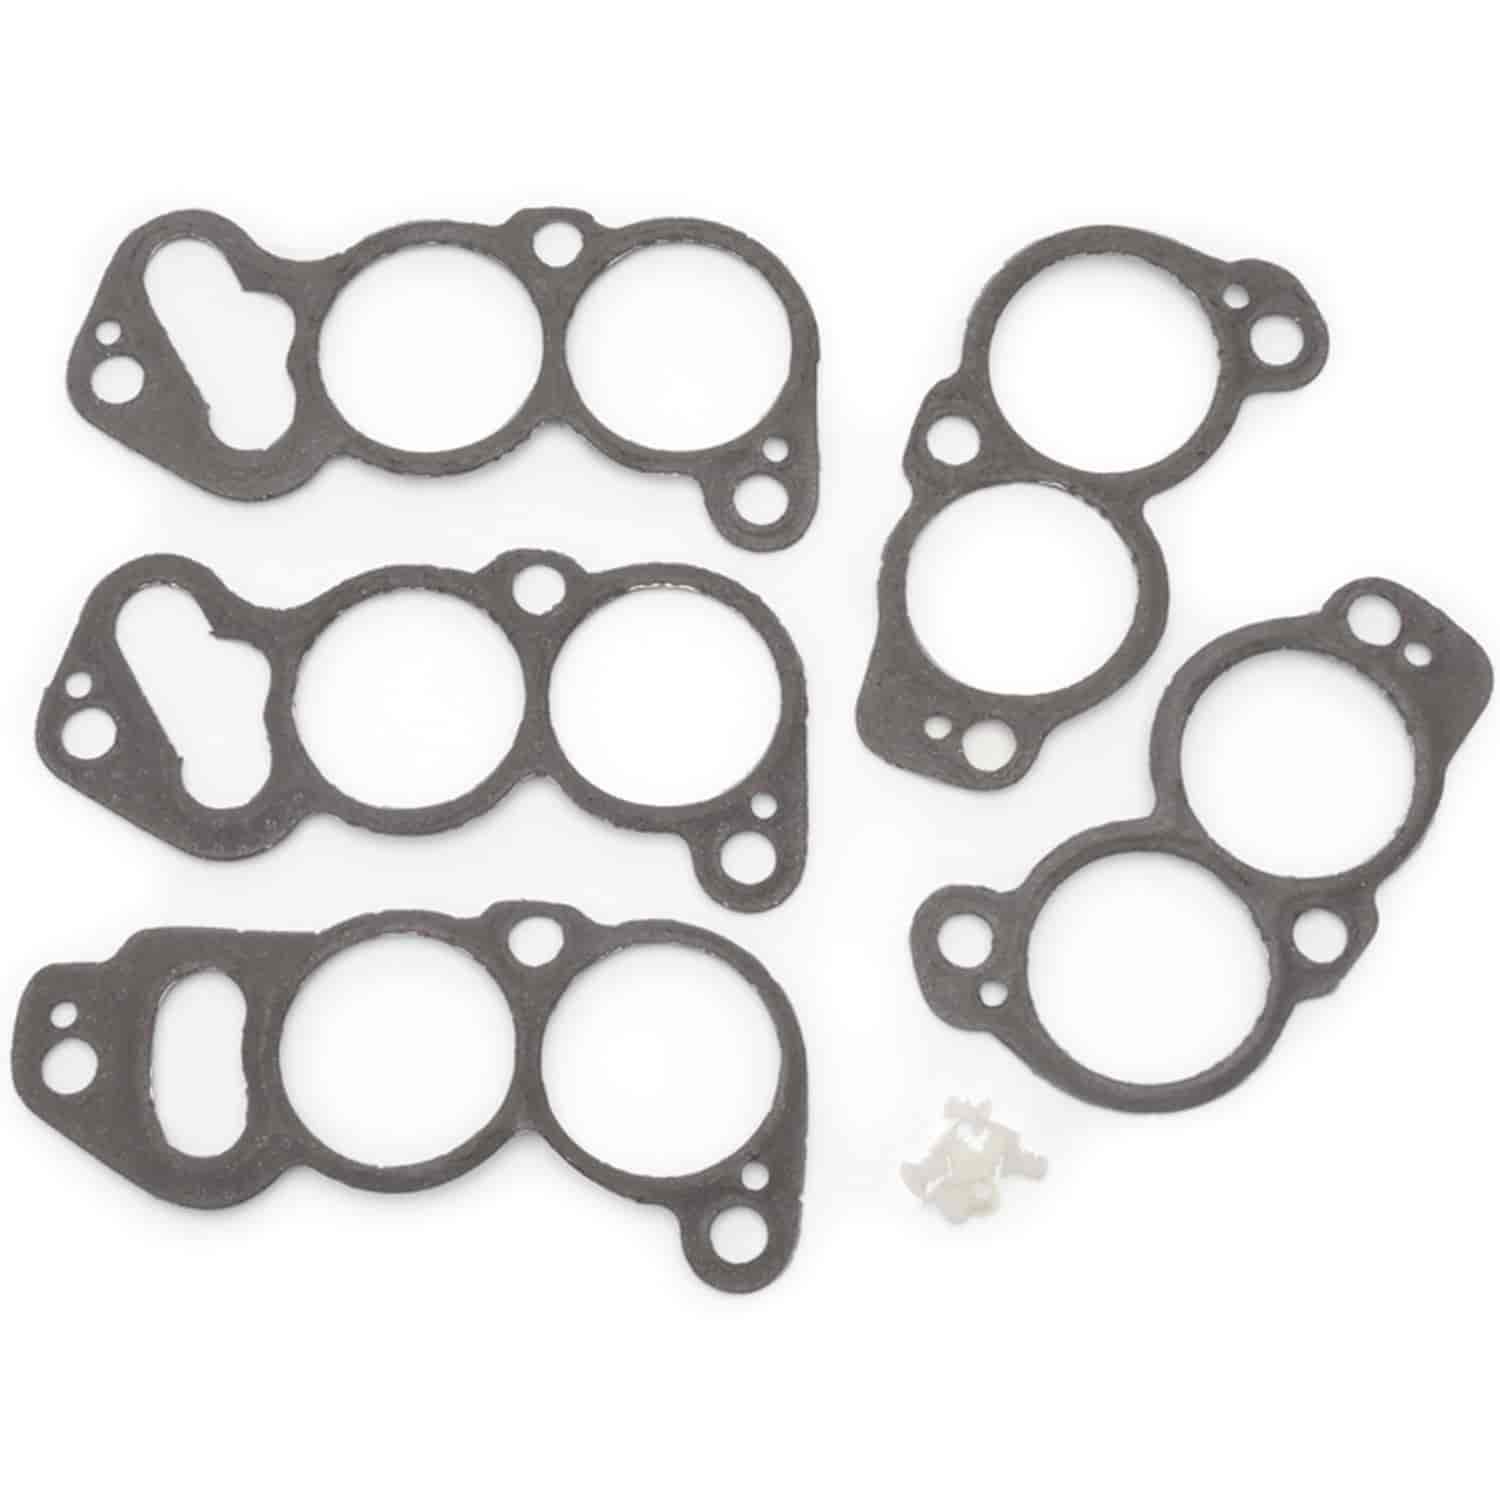 Replacement Gasket Set for Chevy 305-350 T.P.I Hight-Flo Runners